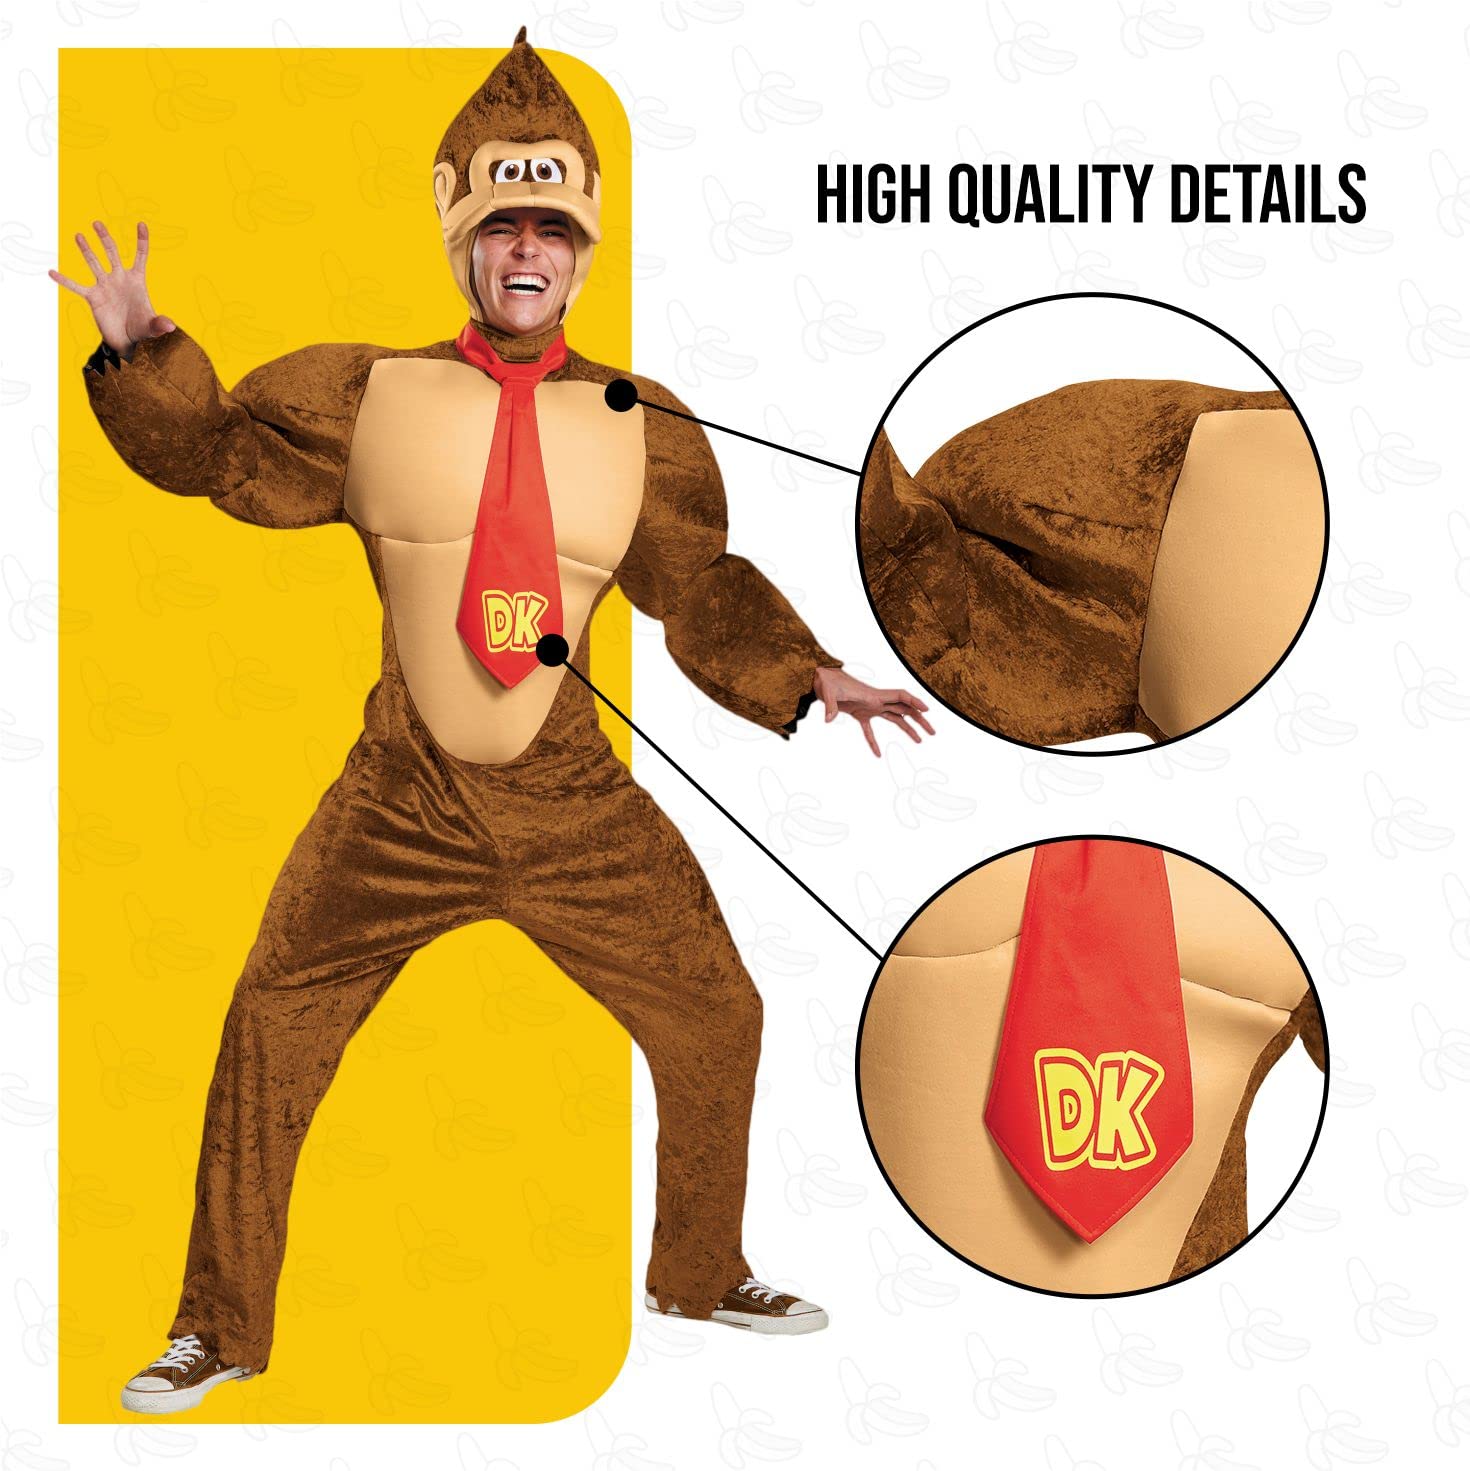 Plus Size Adult Deluxe Donkey Kong Costume